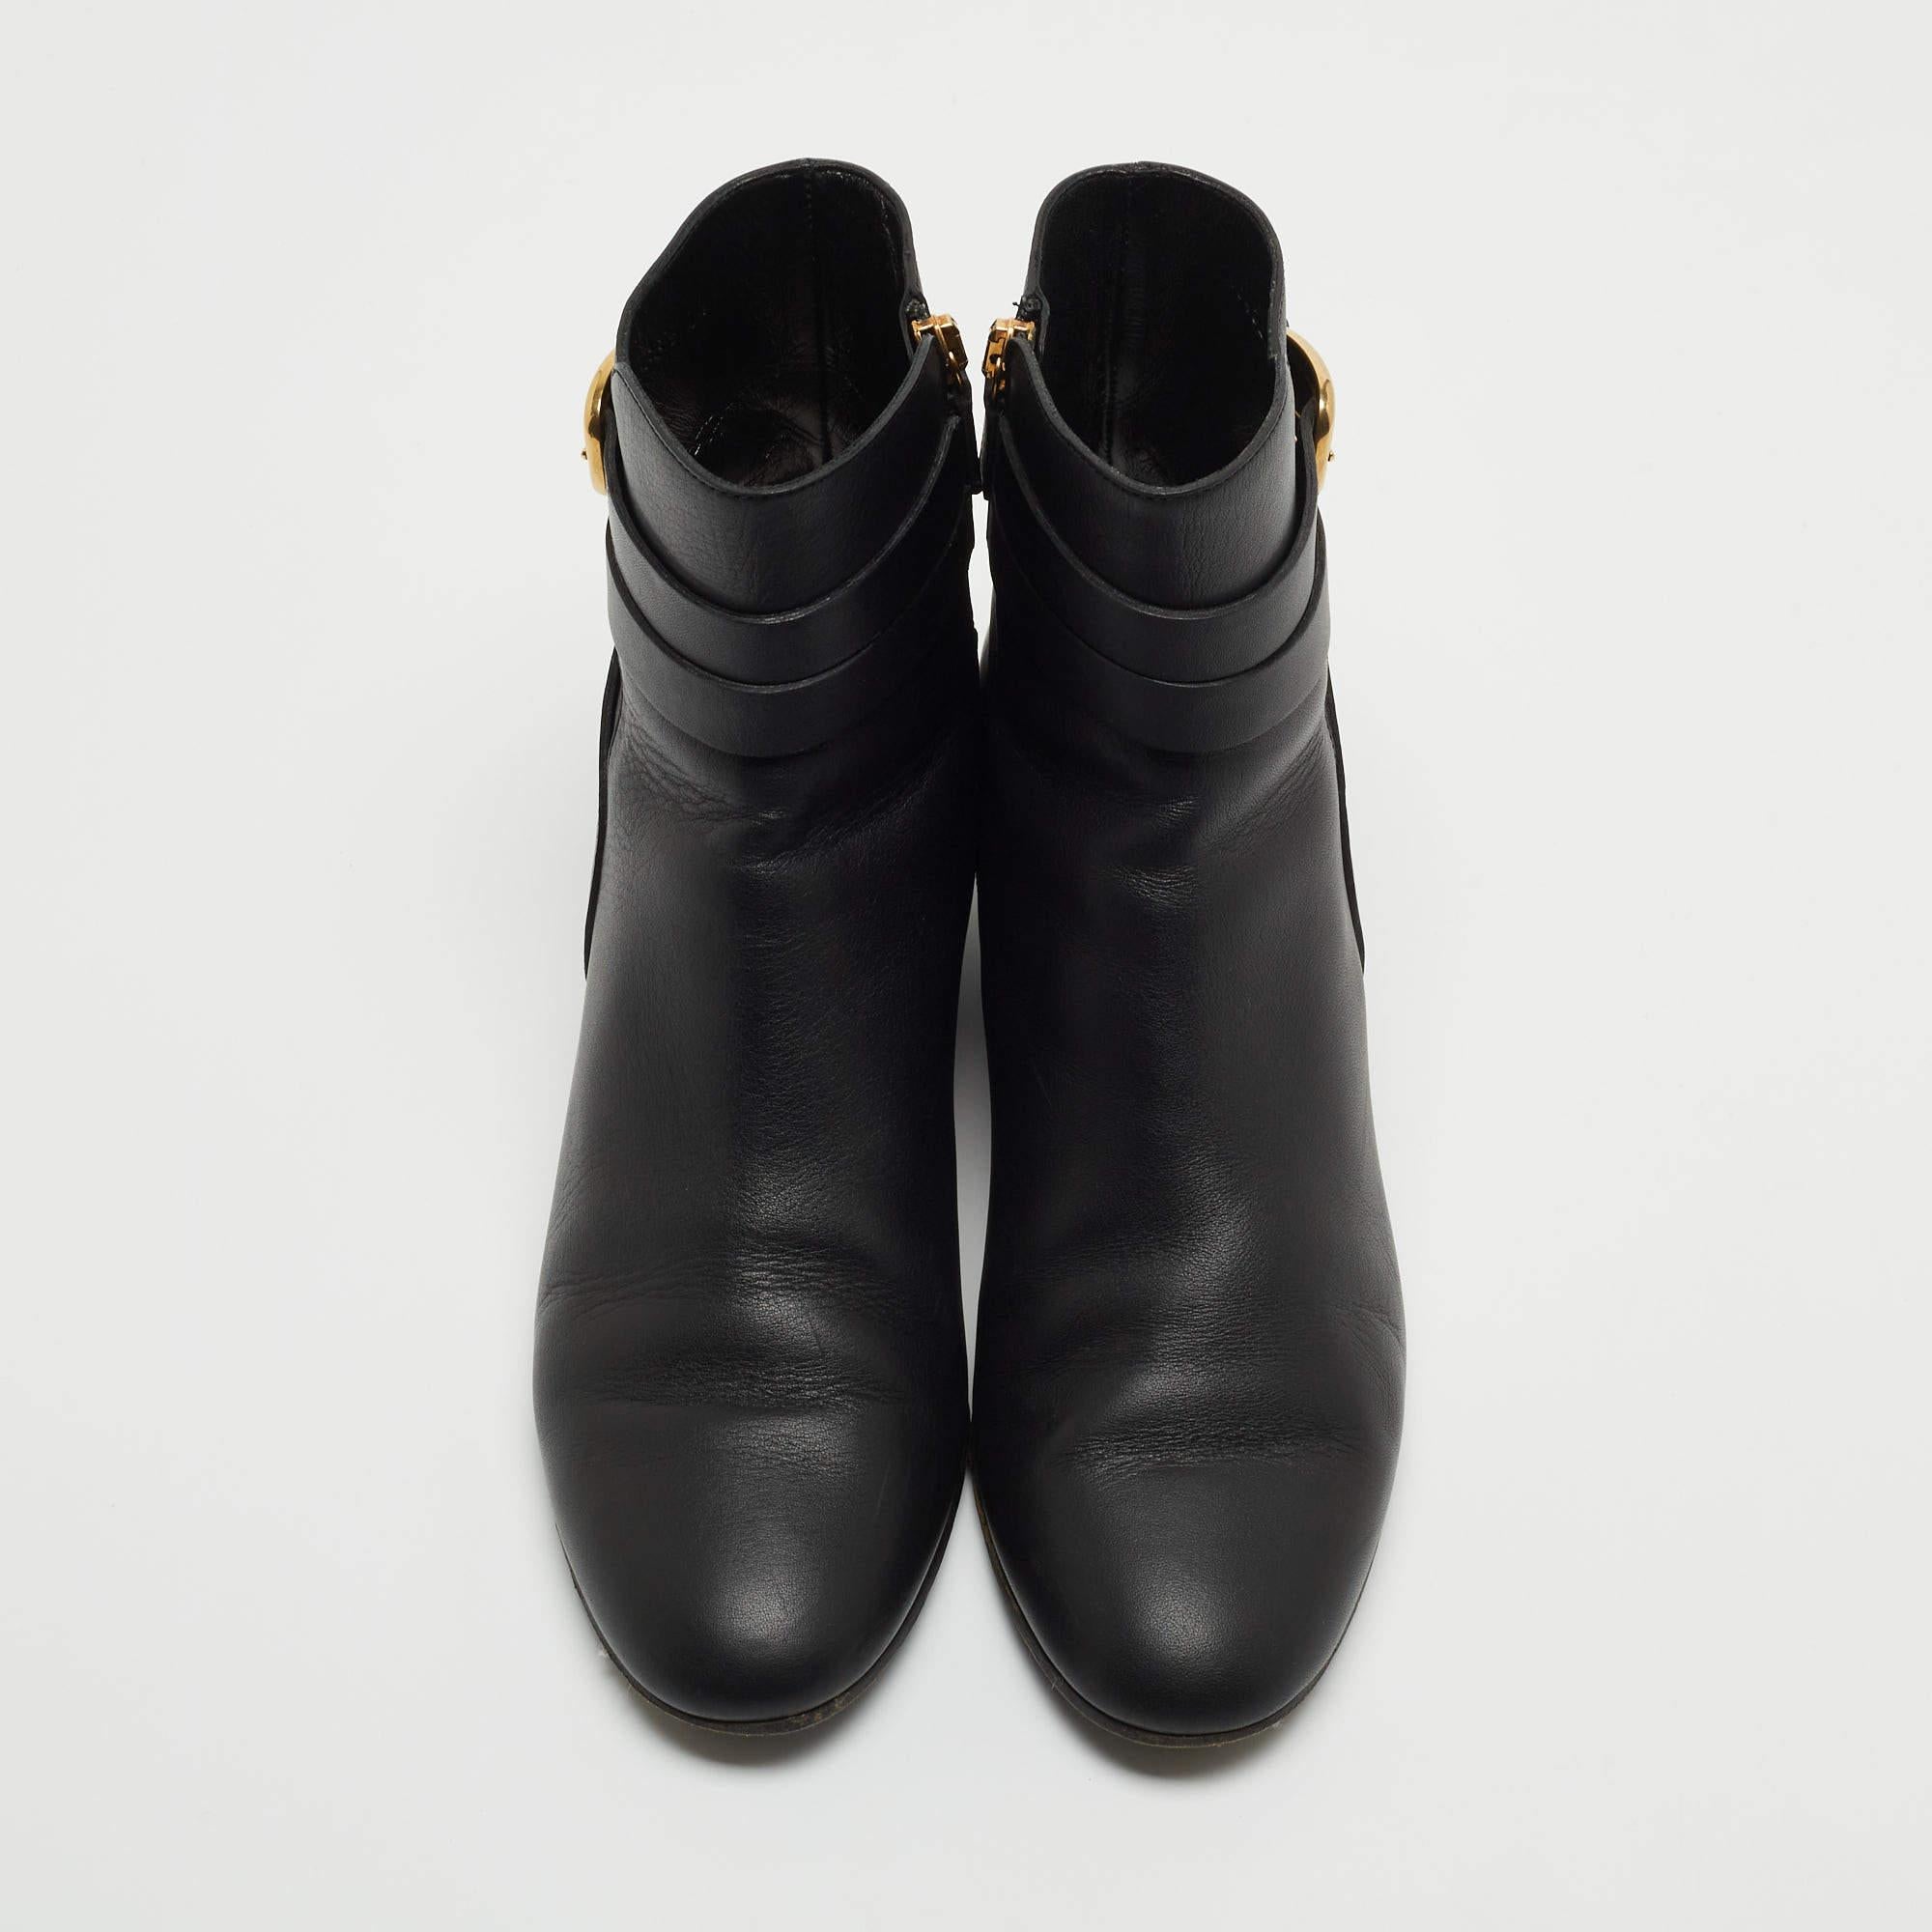 Gucci Black Leather Buckle Detail Ankle Booties  For Sale 2